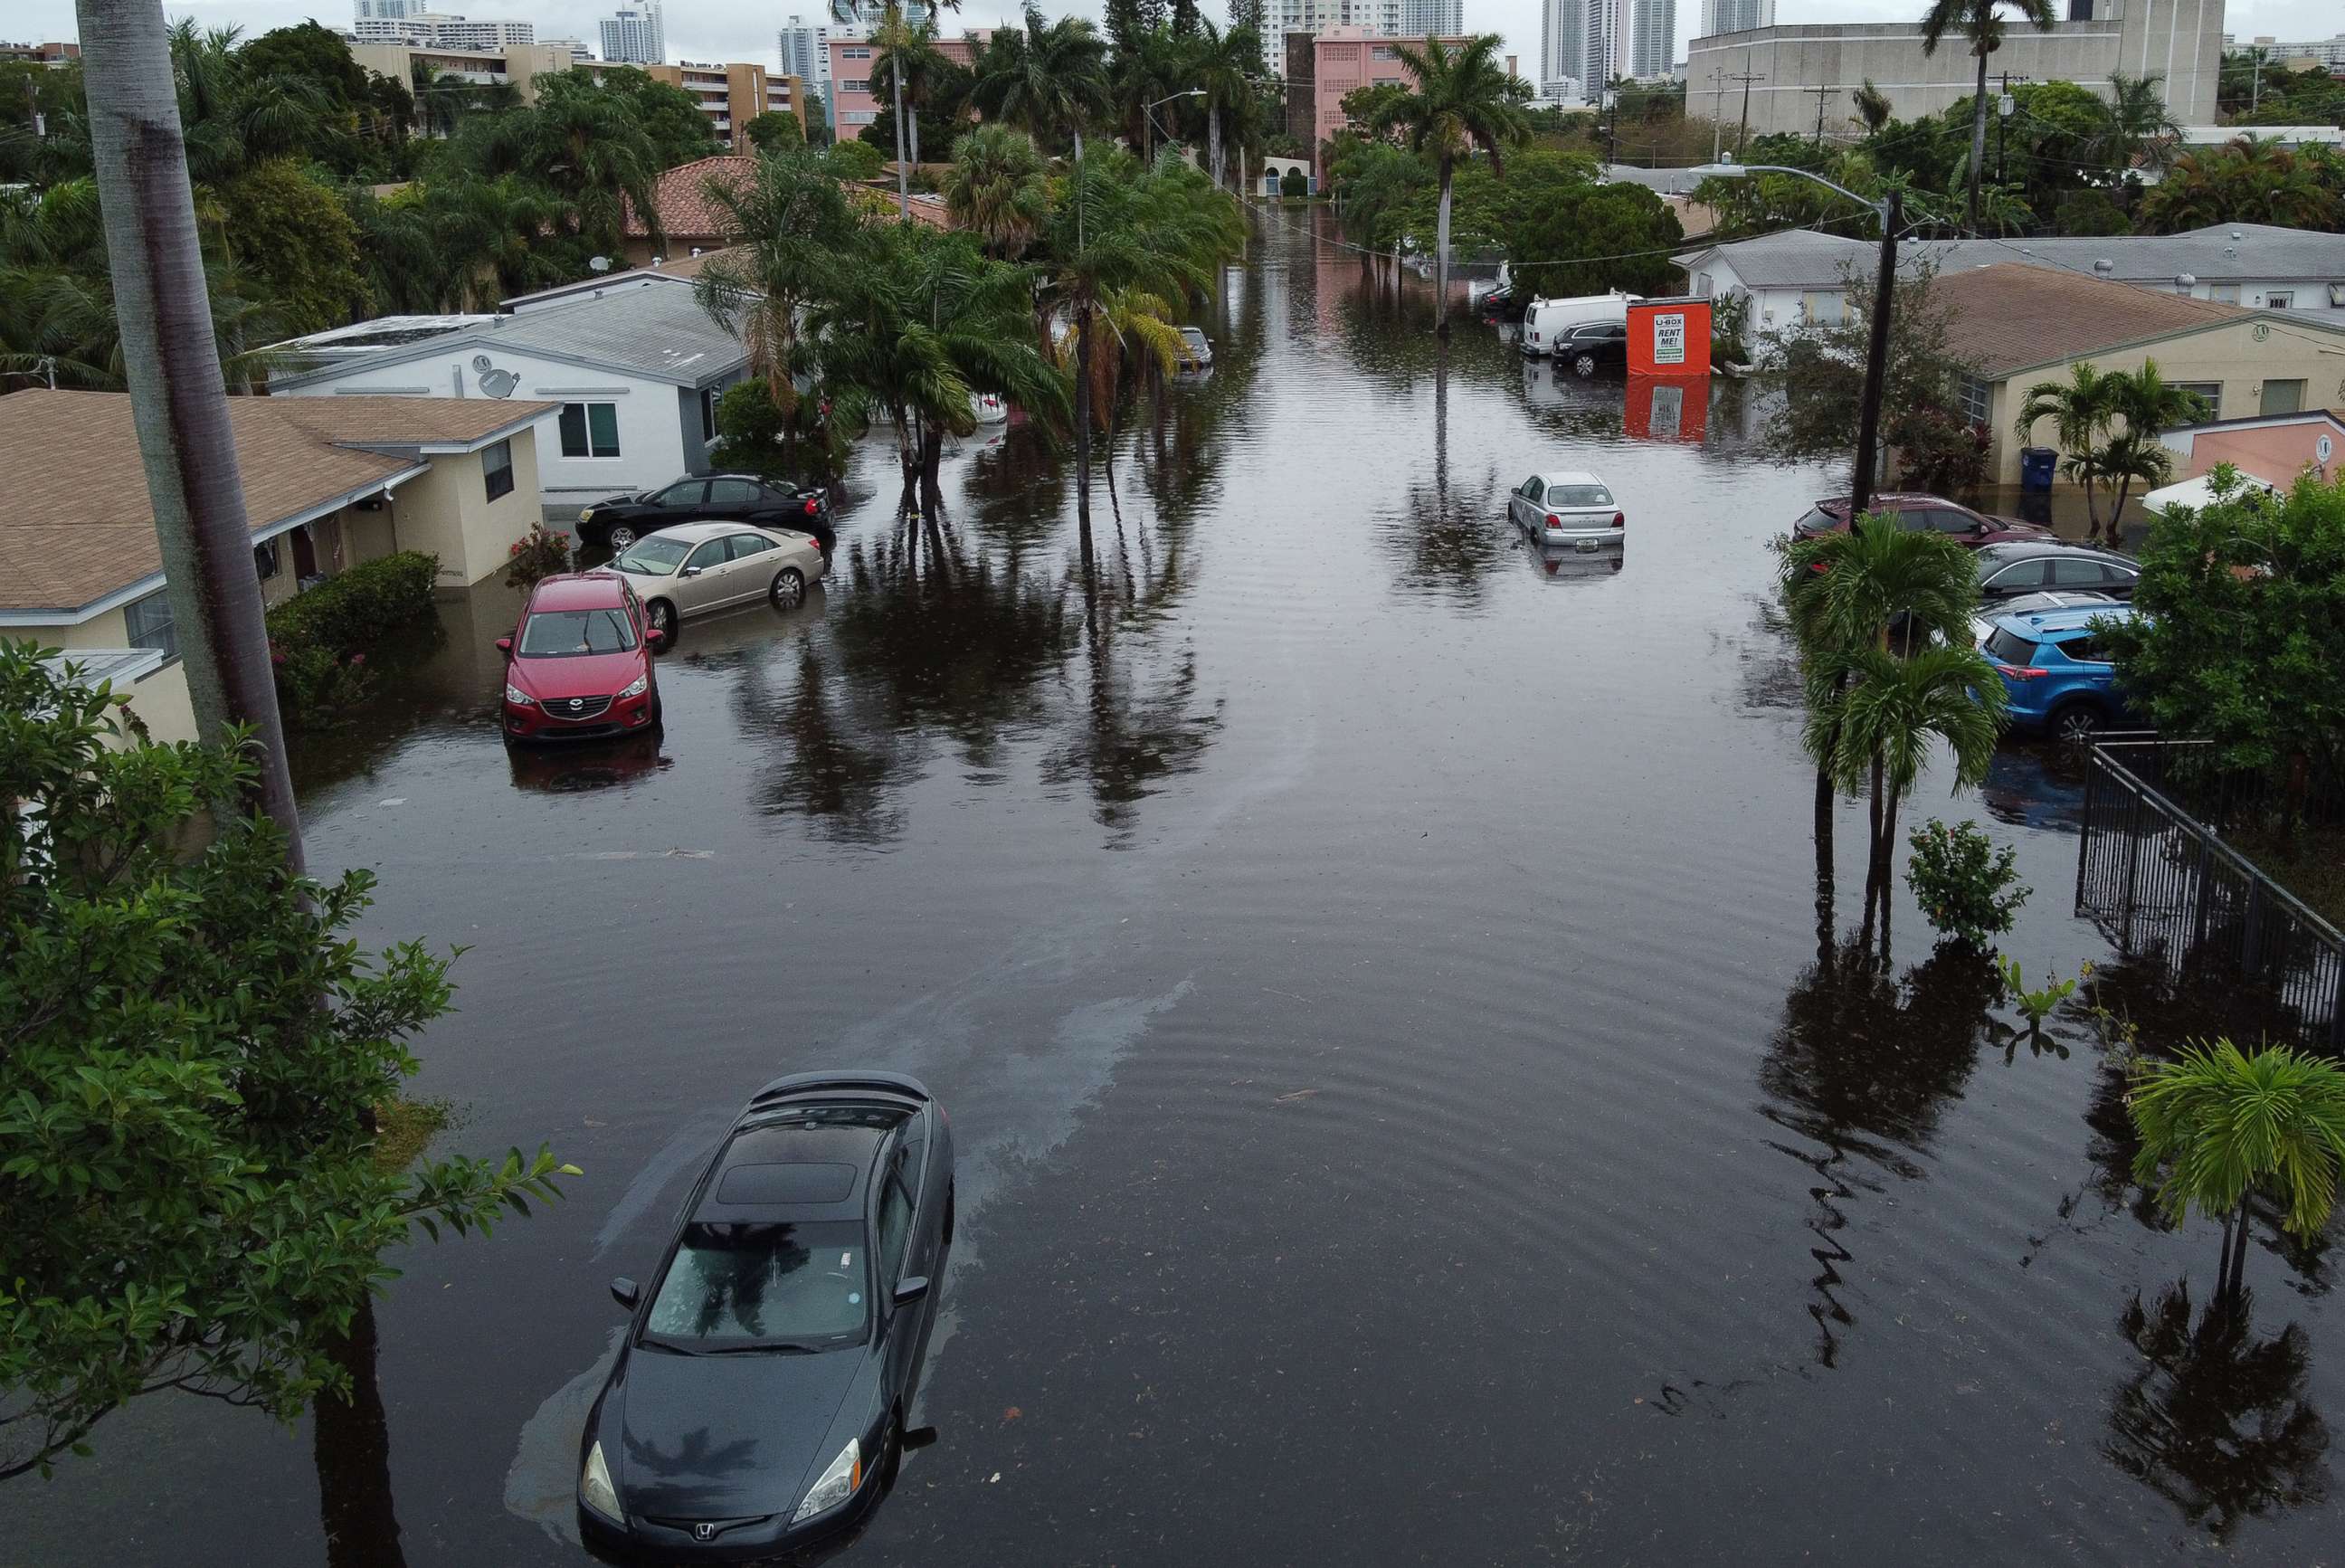 PHOTO: A street is inundated with flood water in Hallandale, Fla., Dec. 23, 2019.